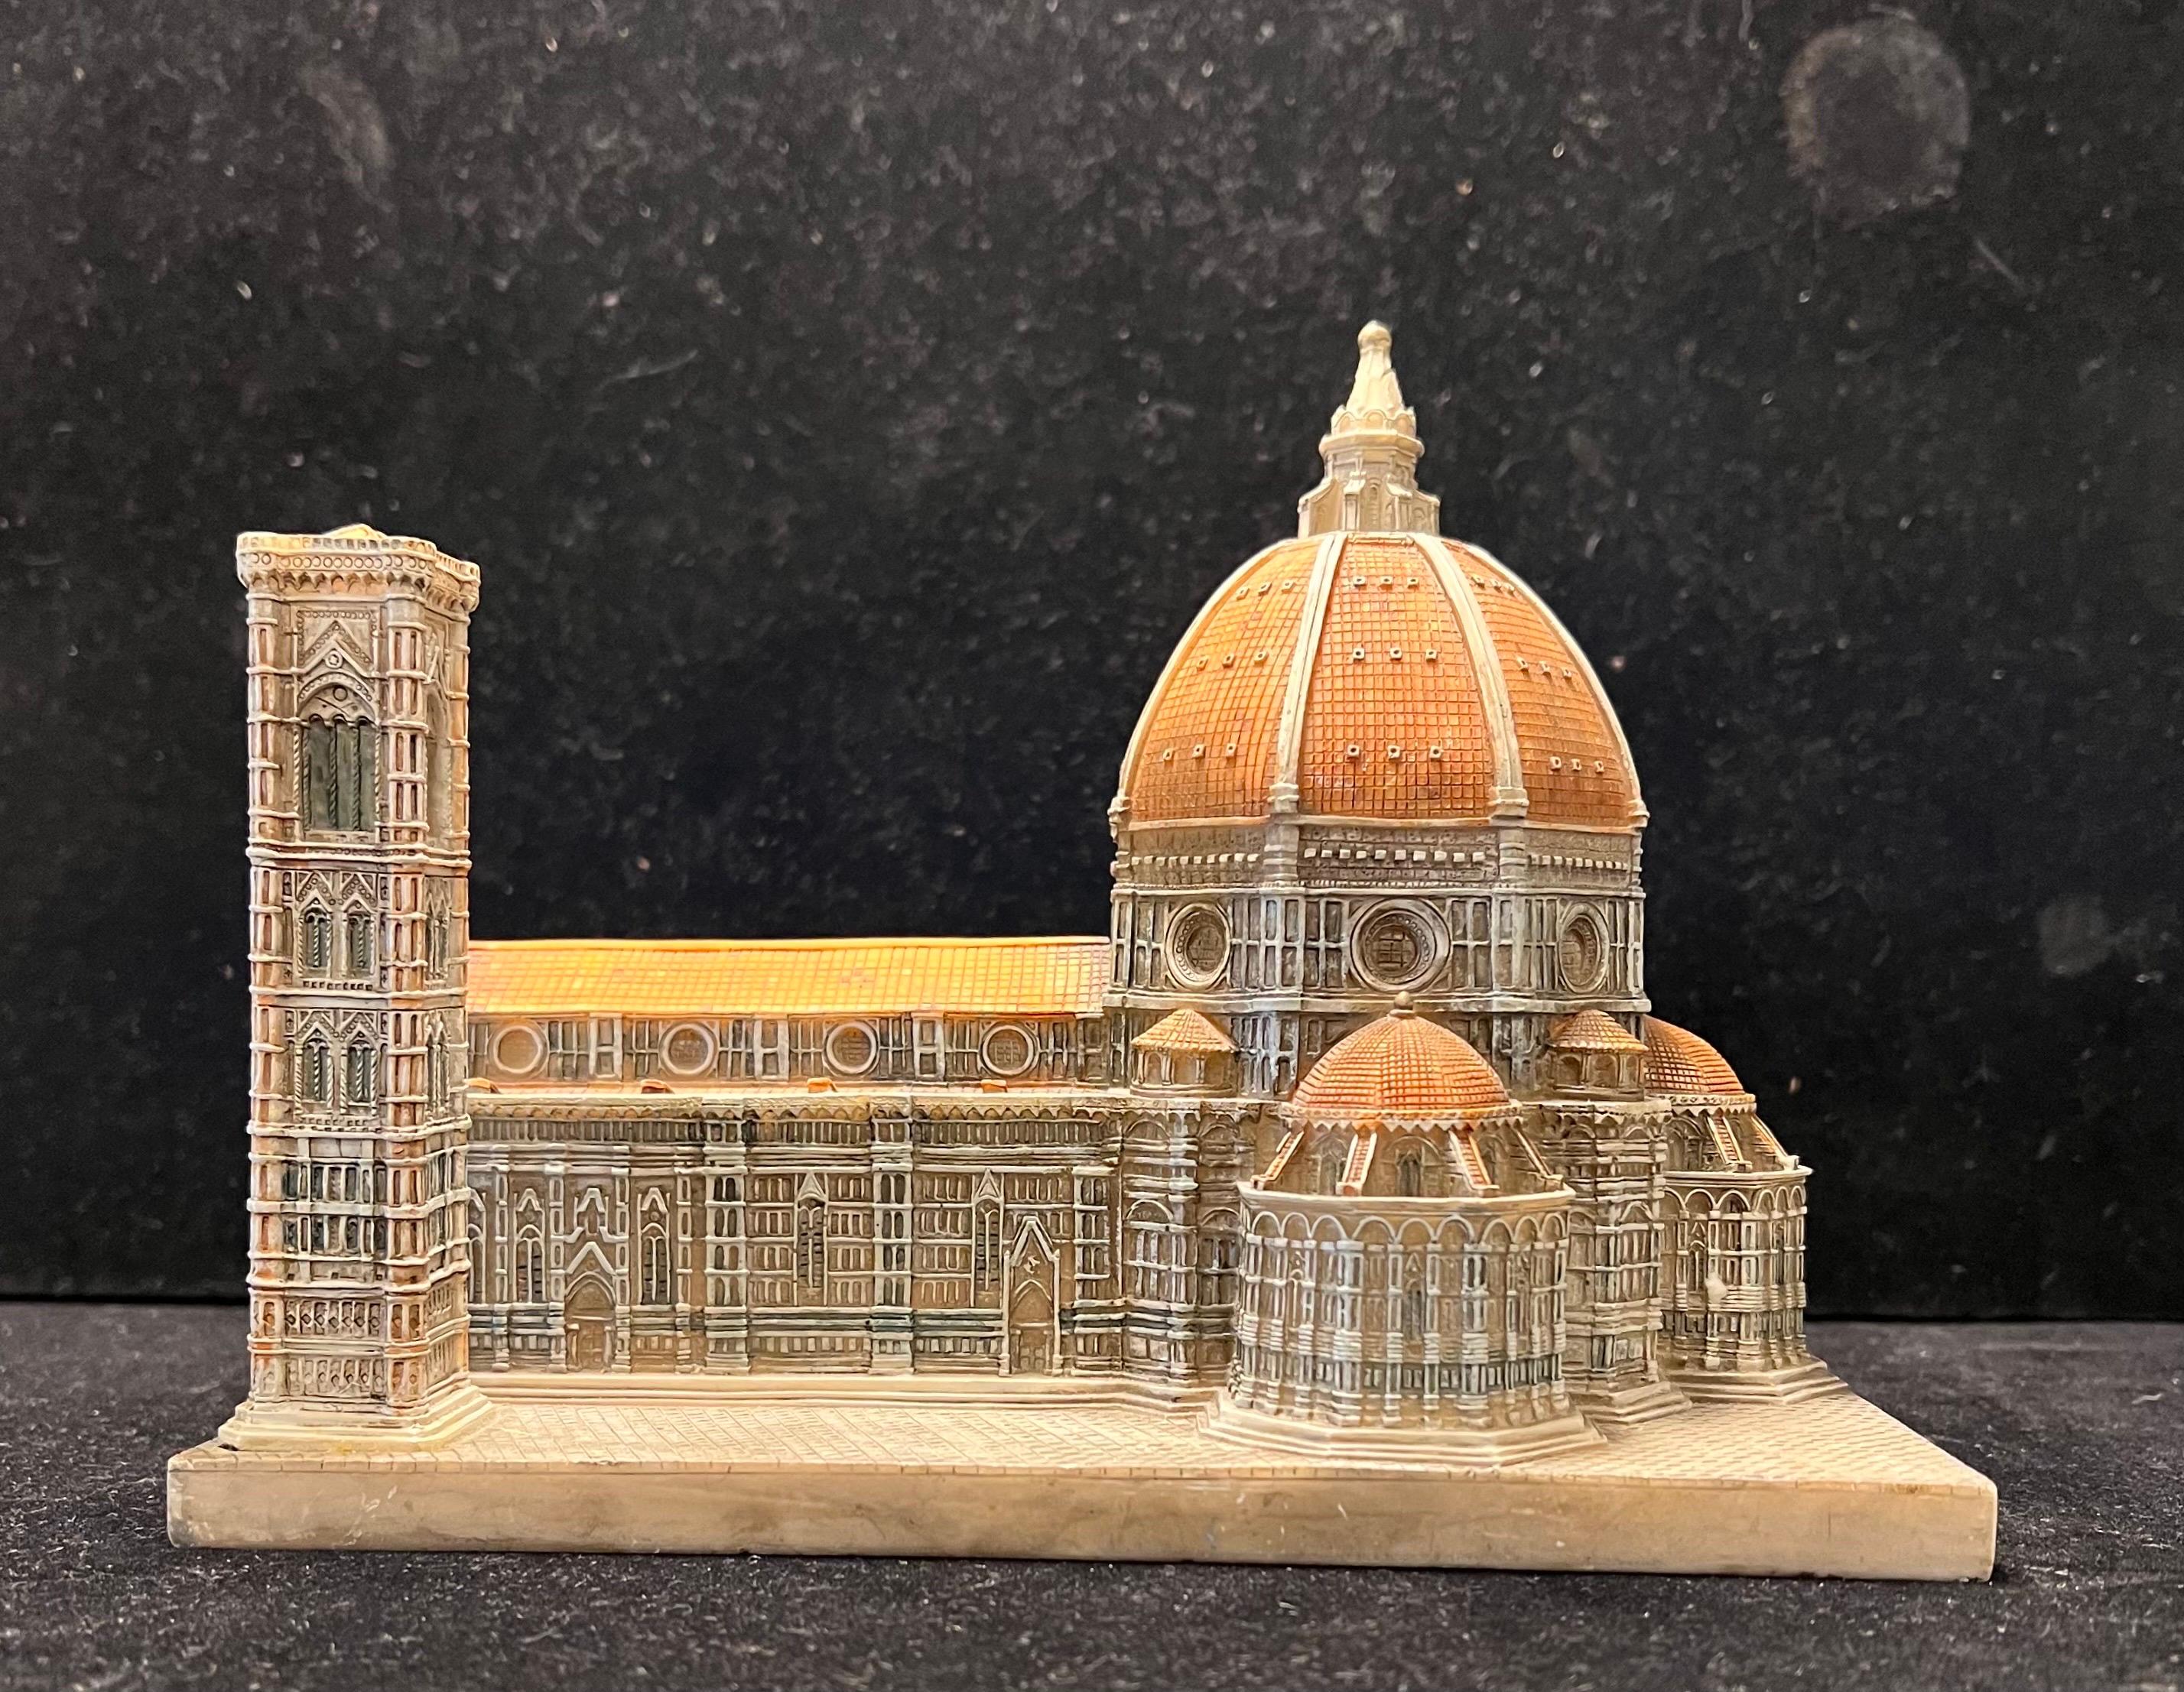 A beautiful small-scale model of the Italian Duomo de Firenze, Florence Italy, circa 1970's made in resin nice and well-done sculpture.